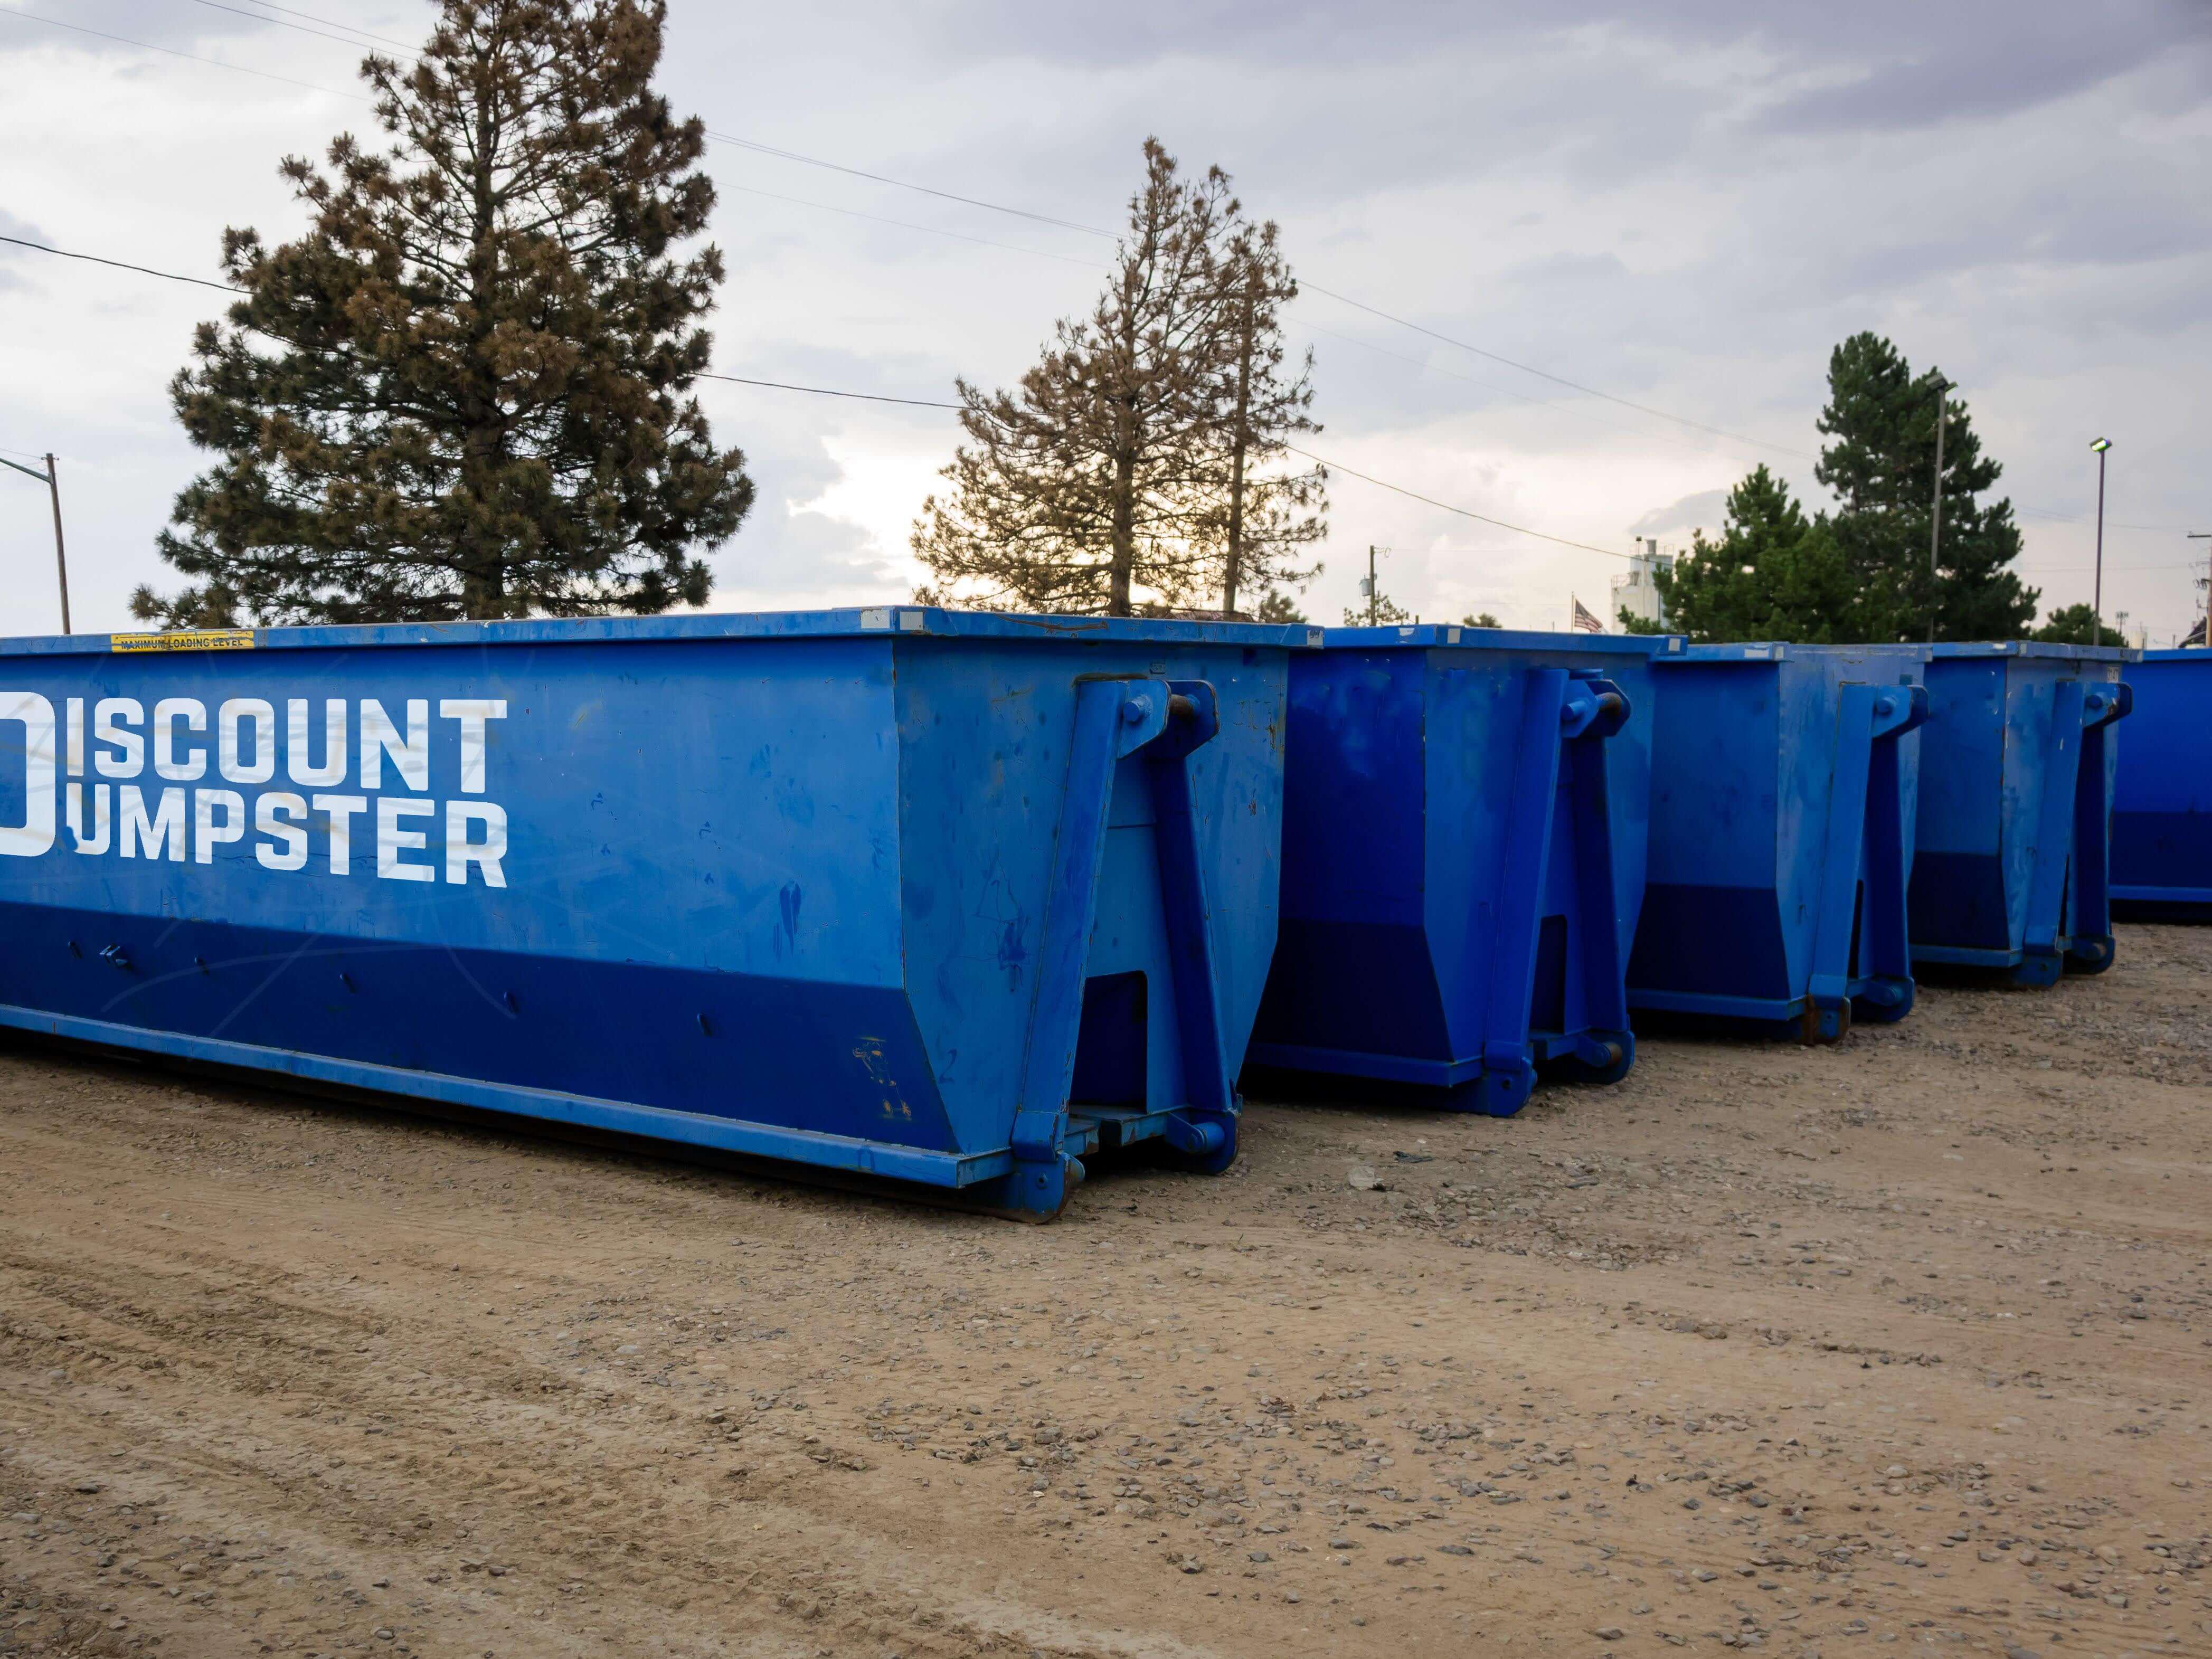 Discount dumpster is proud to serve the chicago il area